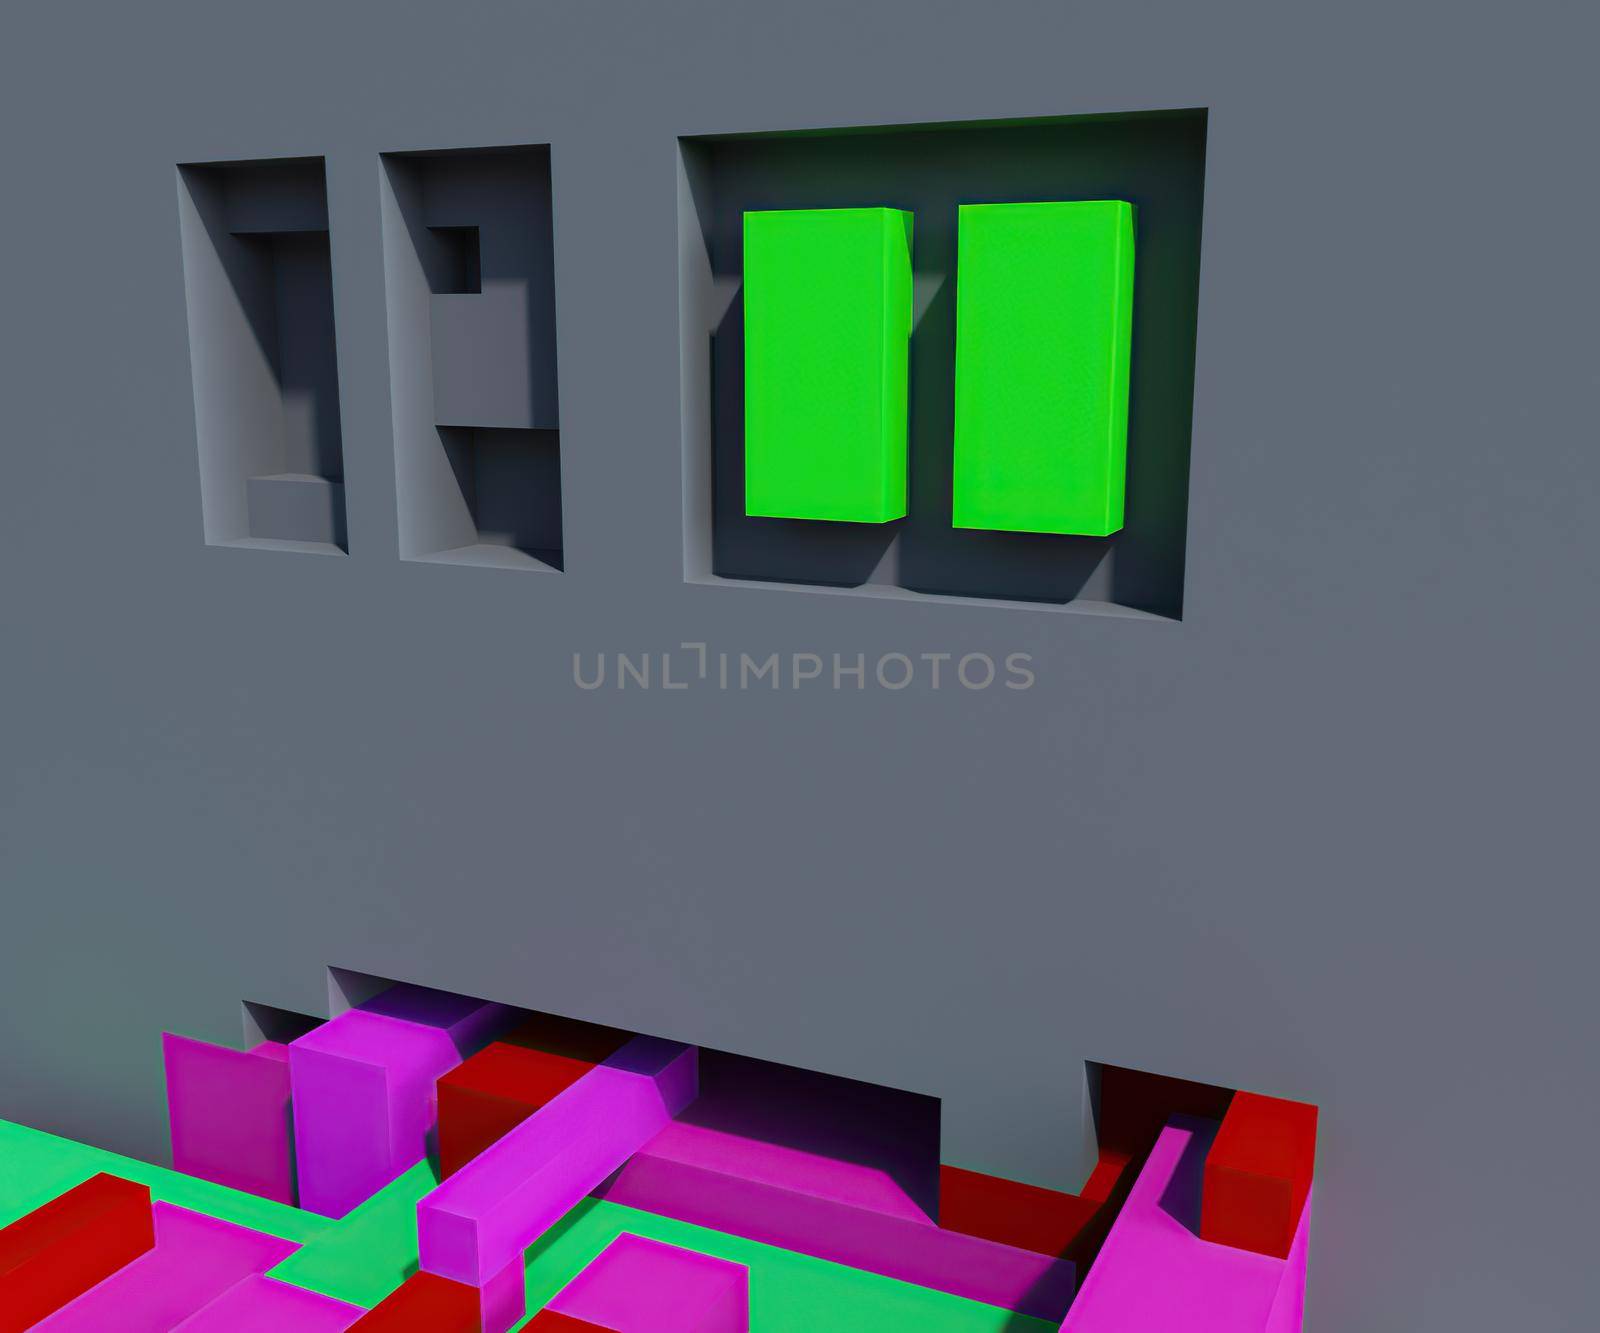 
3d illustration of abstract composition made  in voxel art style 